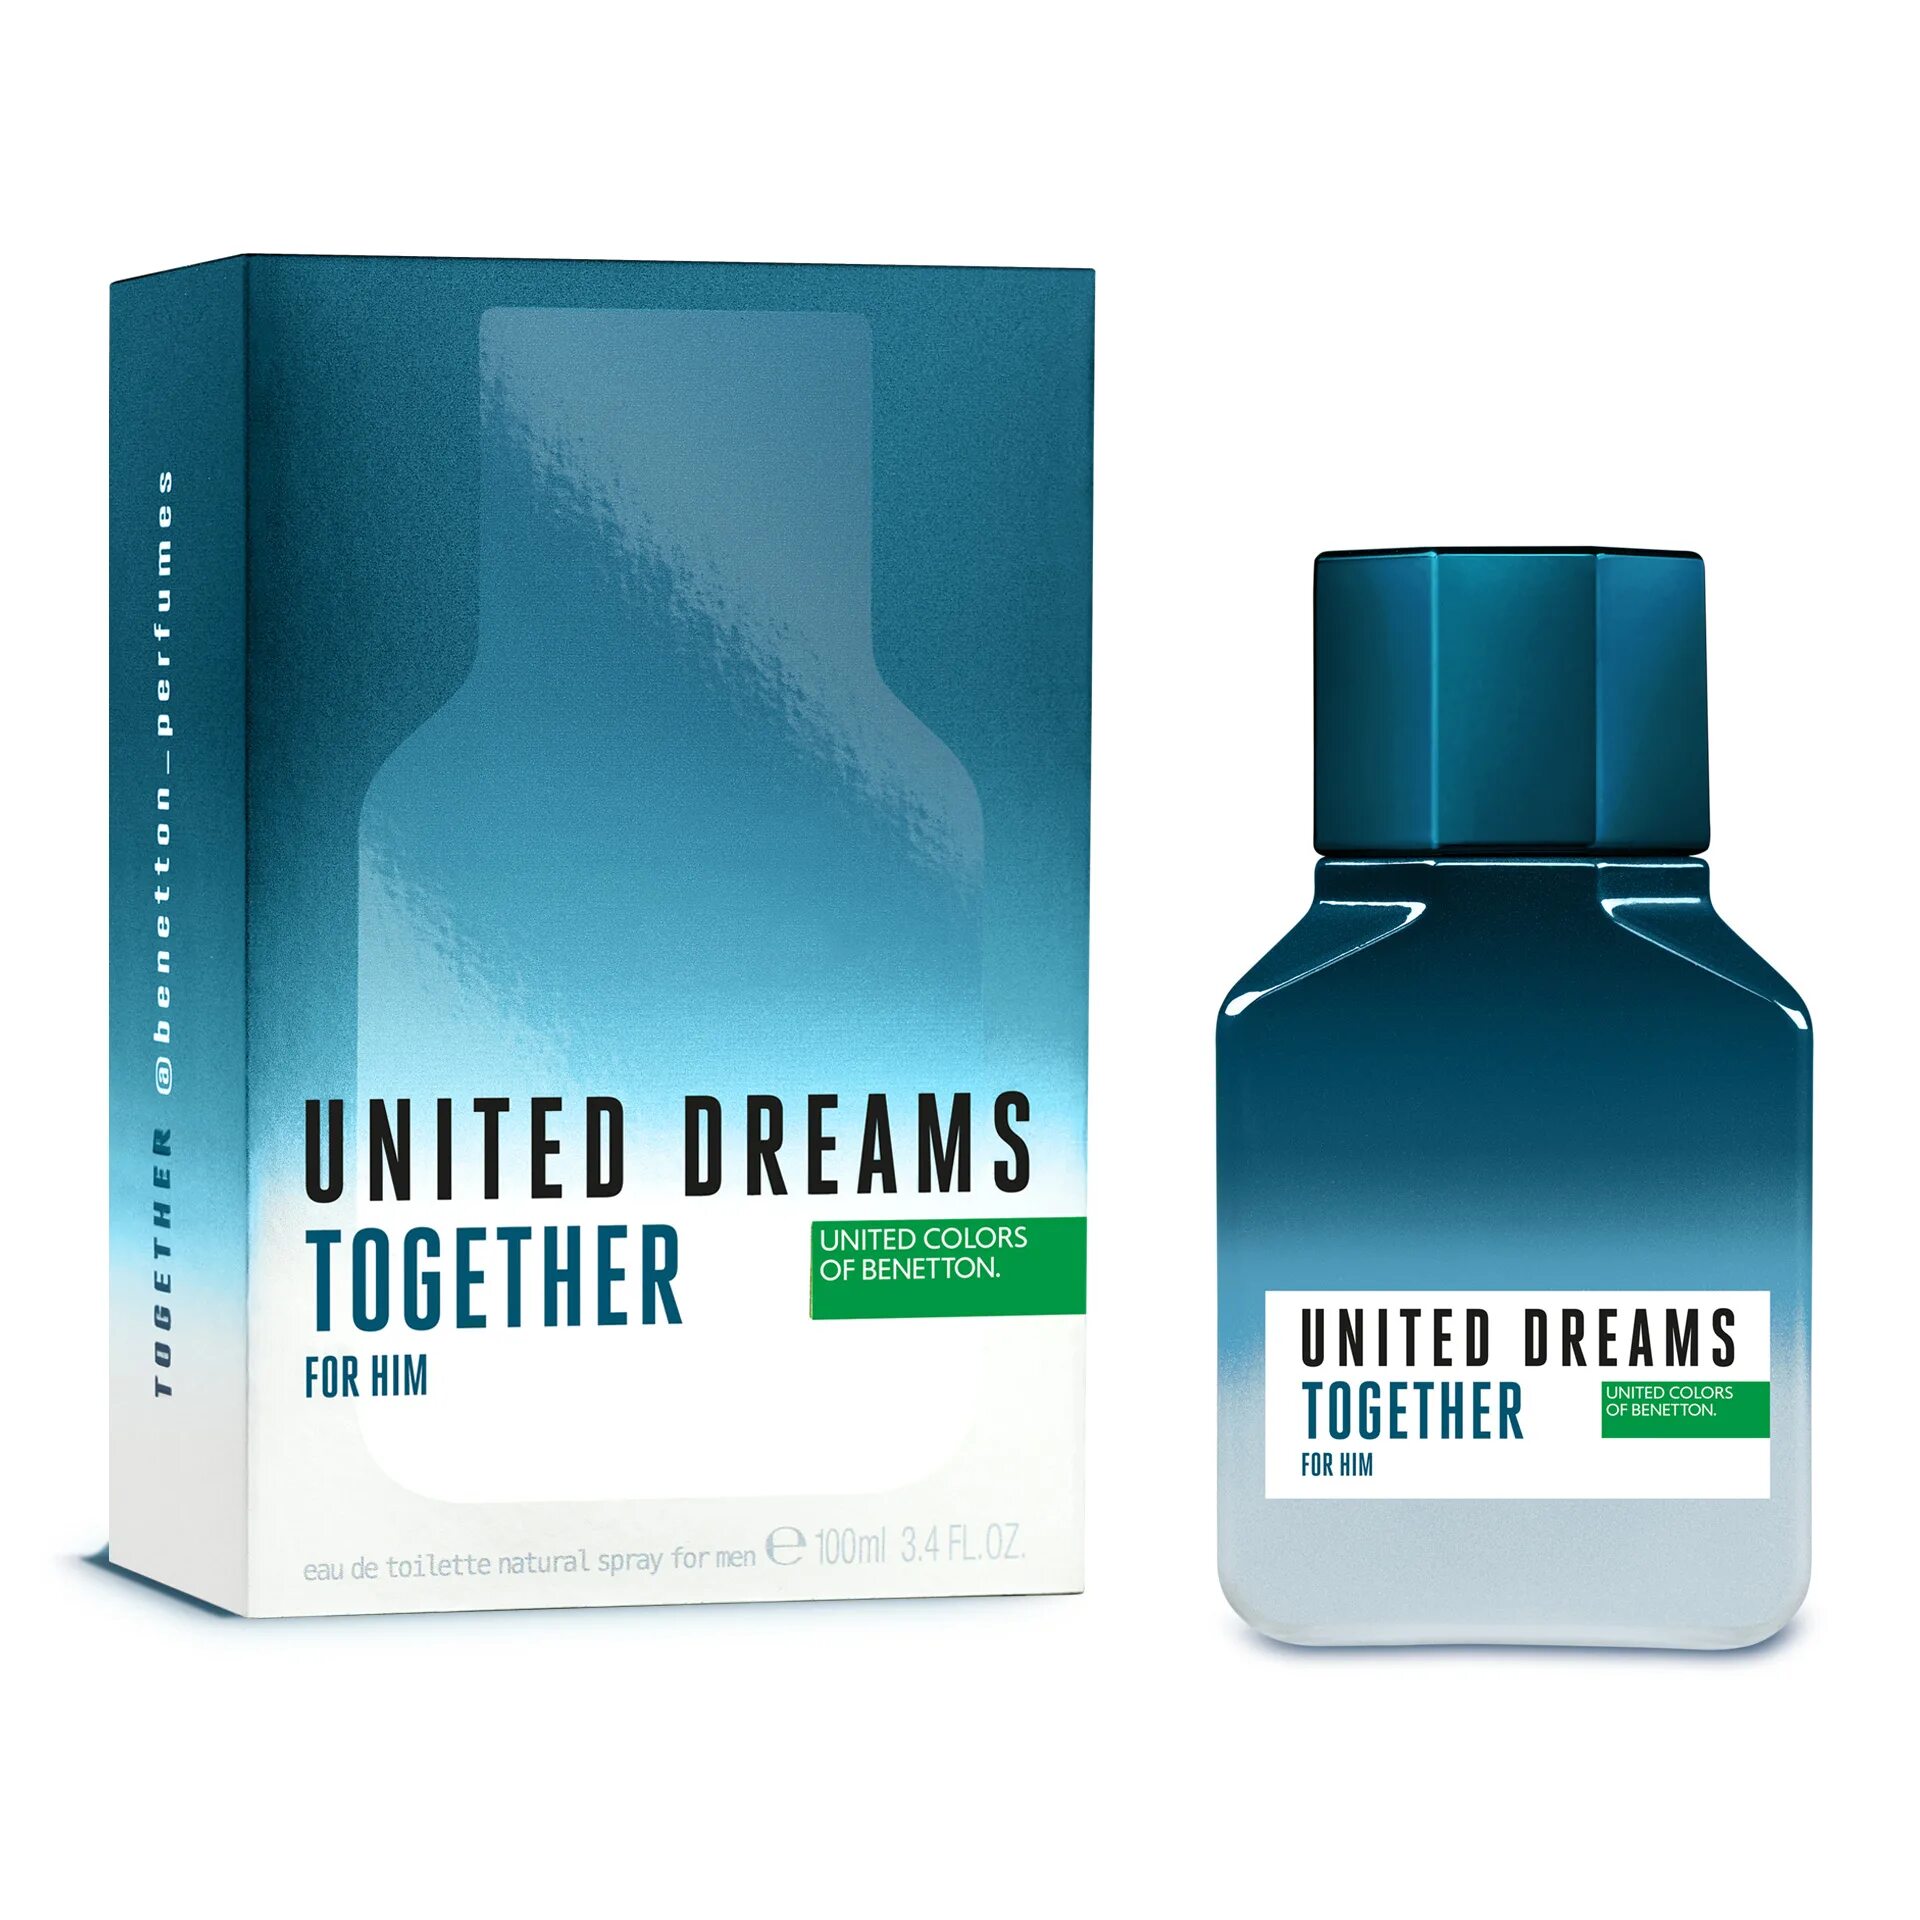 Benetton туалетная вода united dreams. Туалетная вода United Colors of Benetton United Dreams together for him. Духи Benetton United Dreams. Benetton United Dreams мужские. United Colors of Benetton духи Dreams.